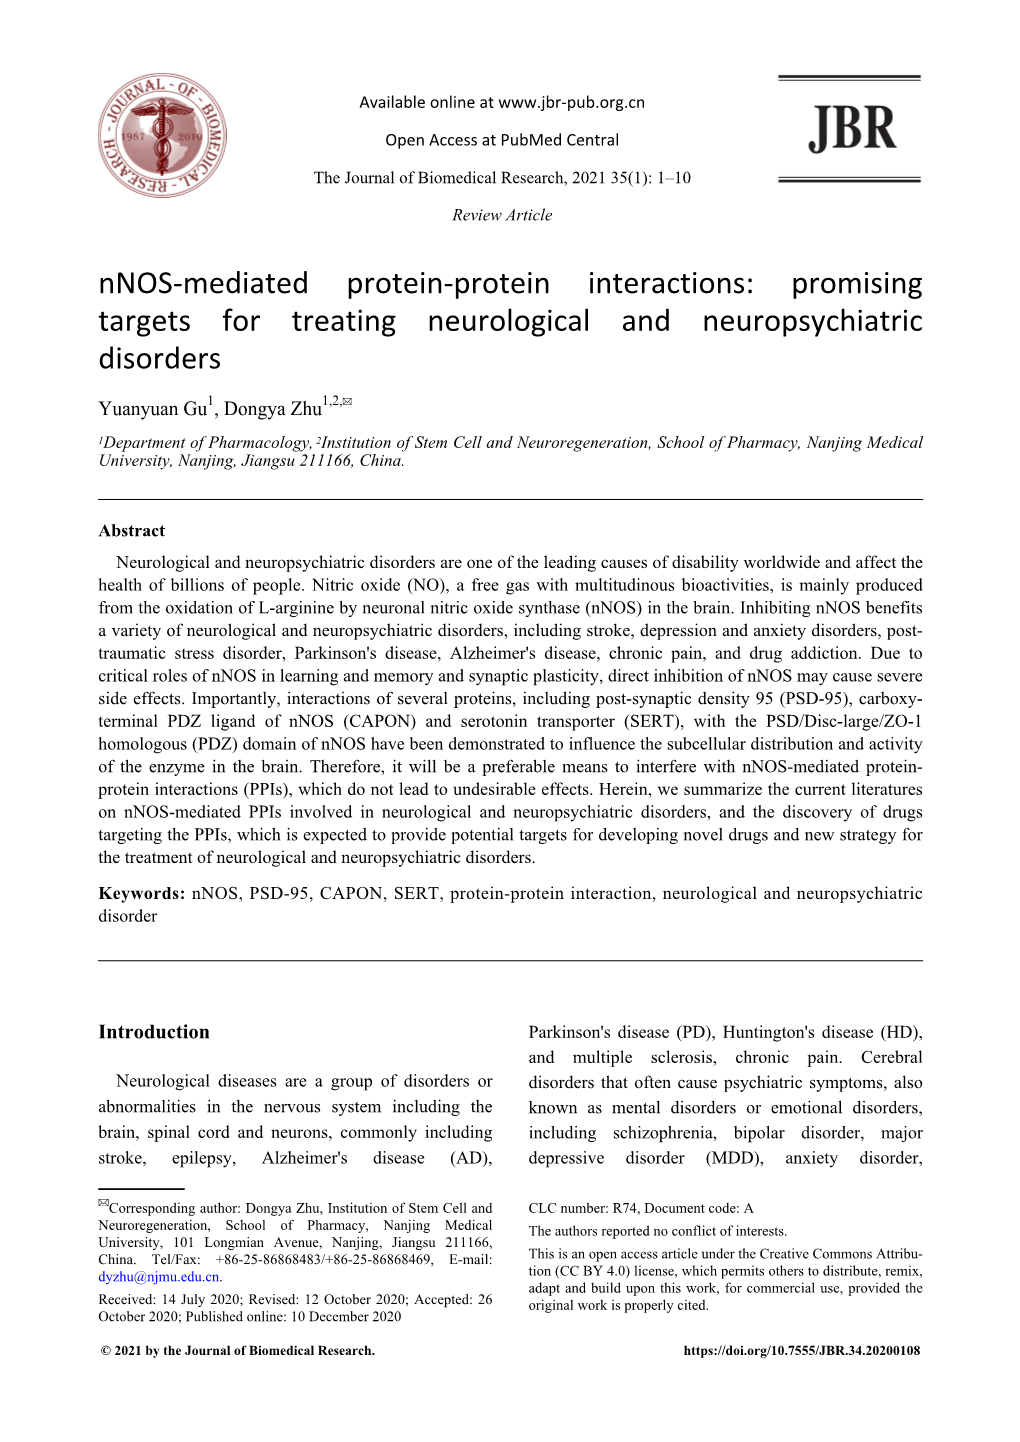 Nnos-Mediated Protein-Protein Interactions: Promising Targets for Treating Neurological and Neuropsychiatric Disorders